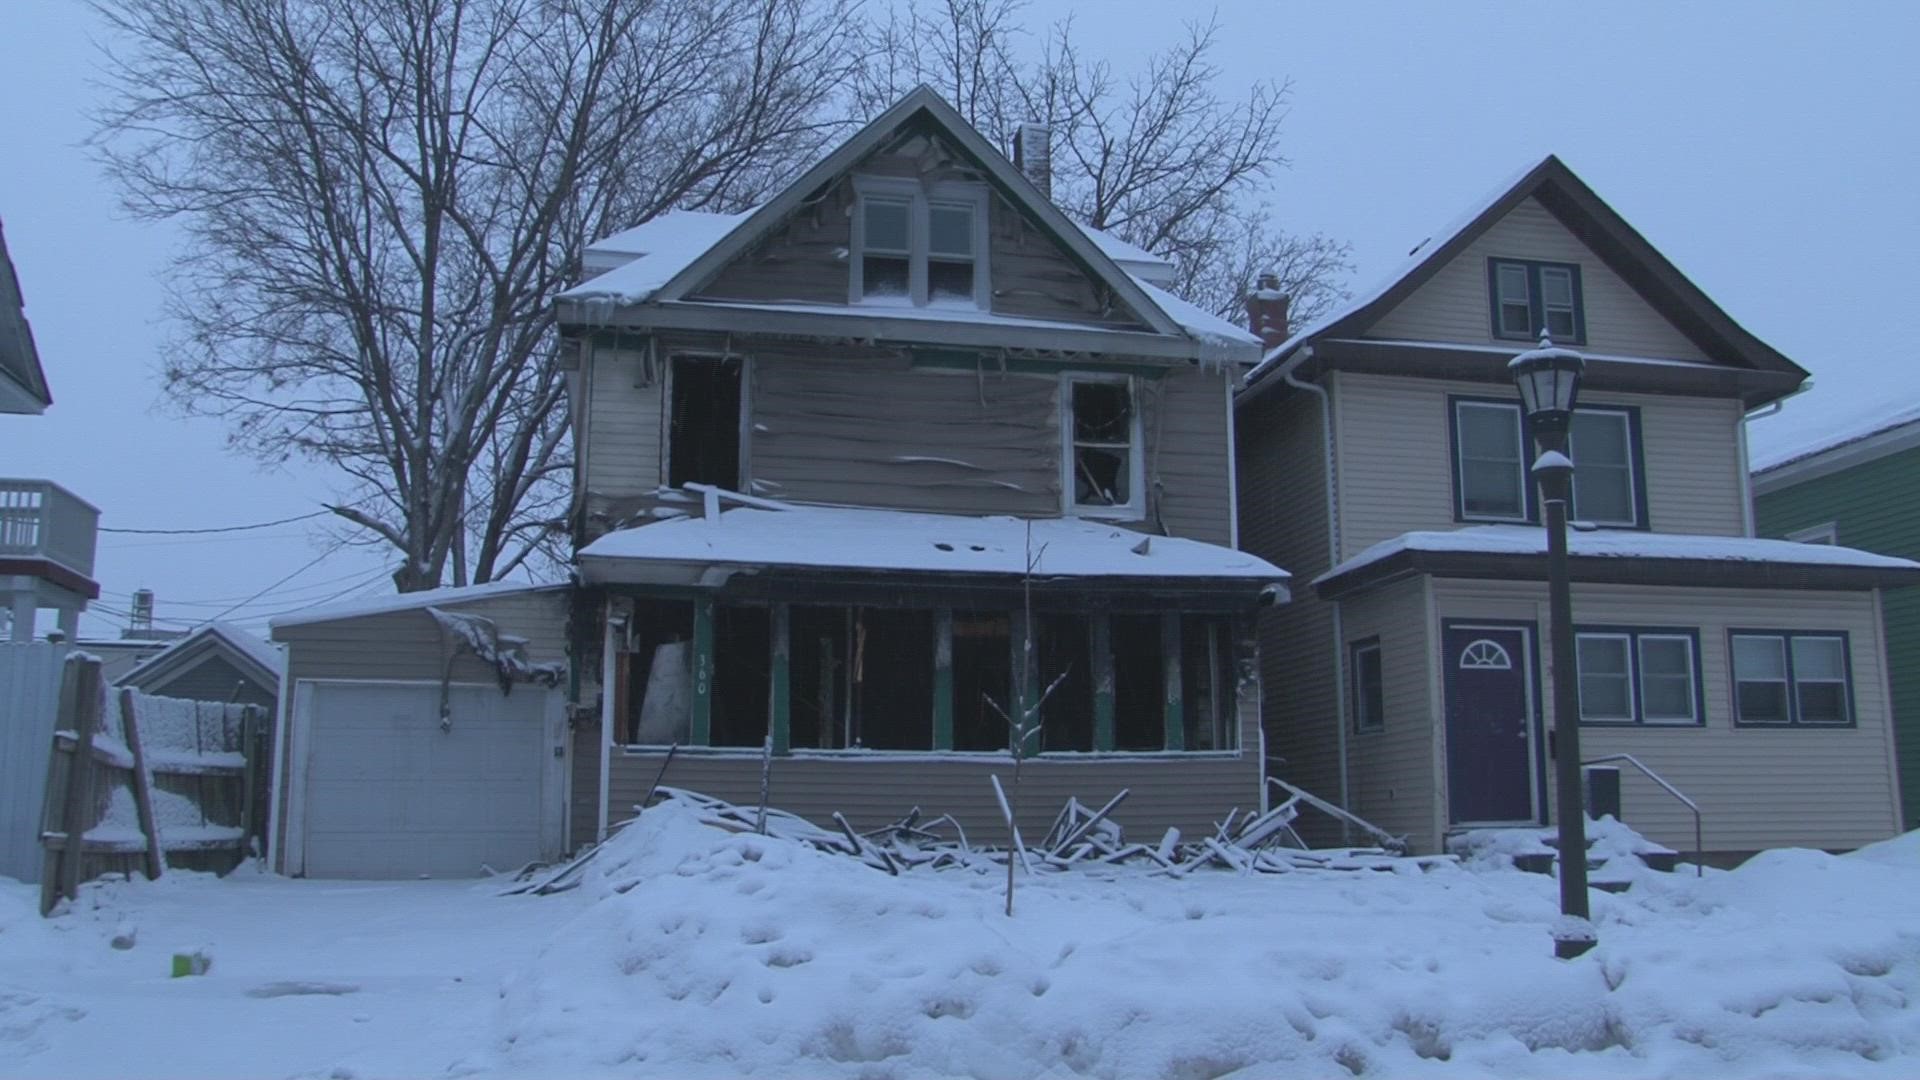 St. Paul fire officials say a home that burned on the 300 block of Sherburne Ave. last night is a total loss, leaving 3 adults and 11 children looking for shelter.